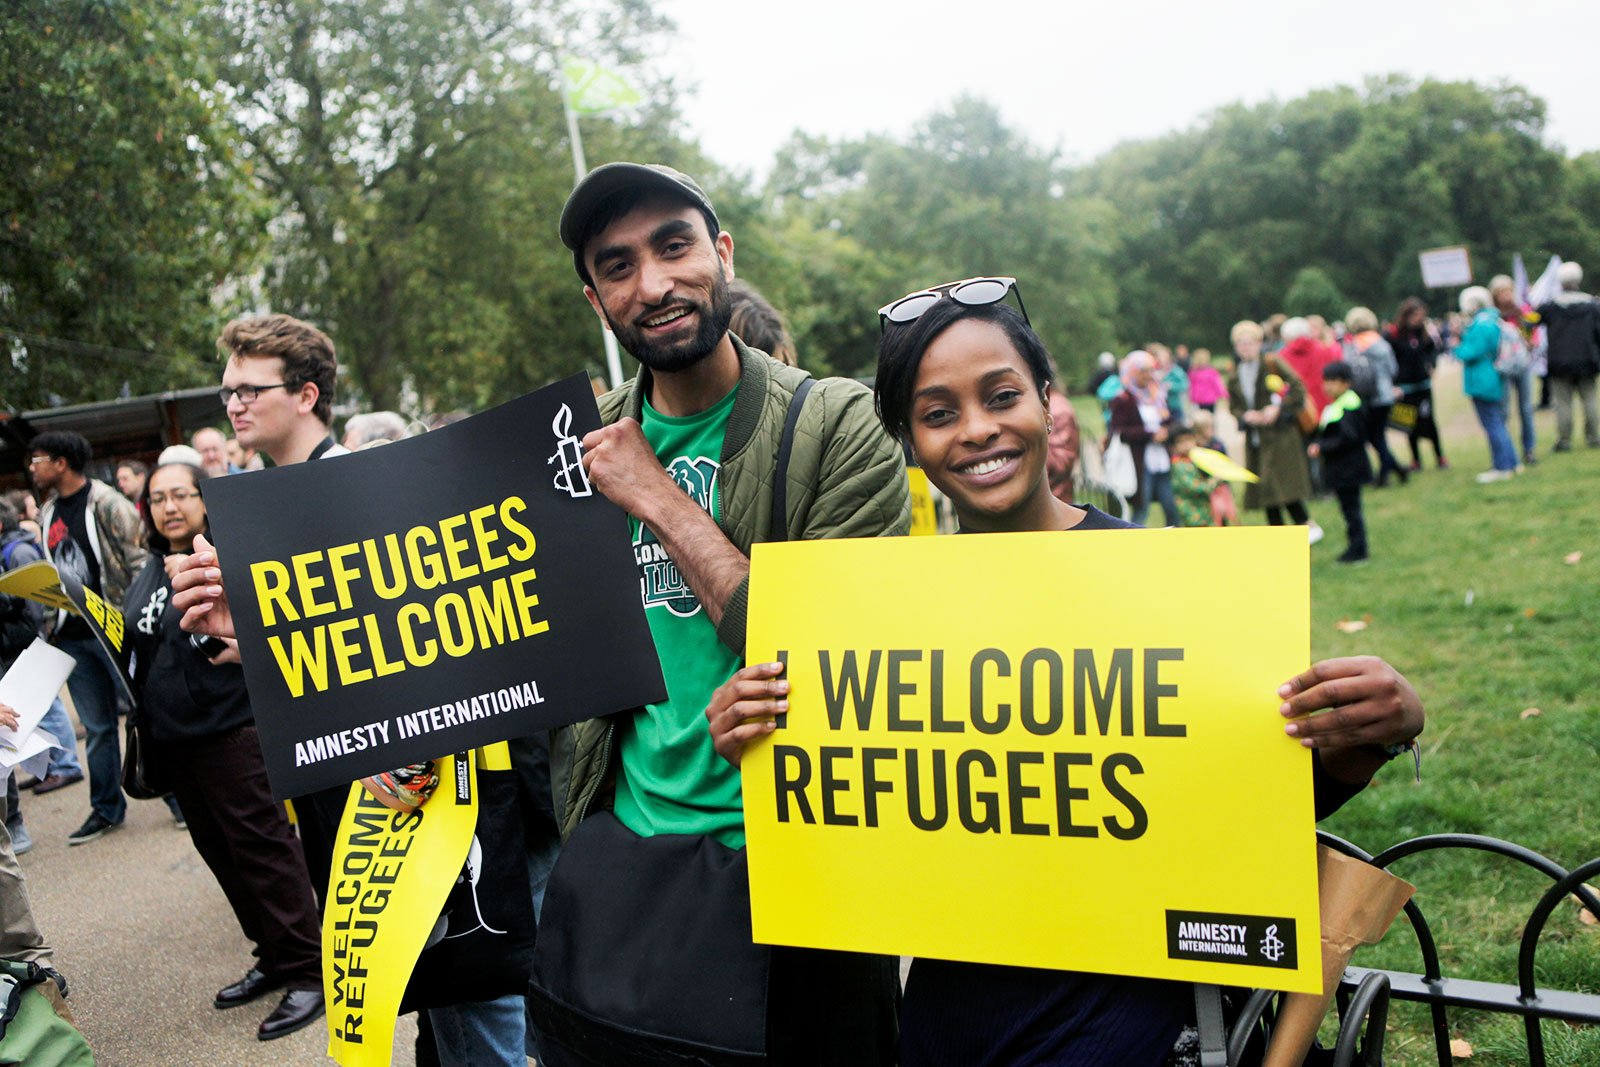 Five things you can do to welcome refugees and asylum seekers